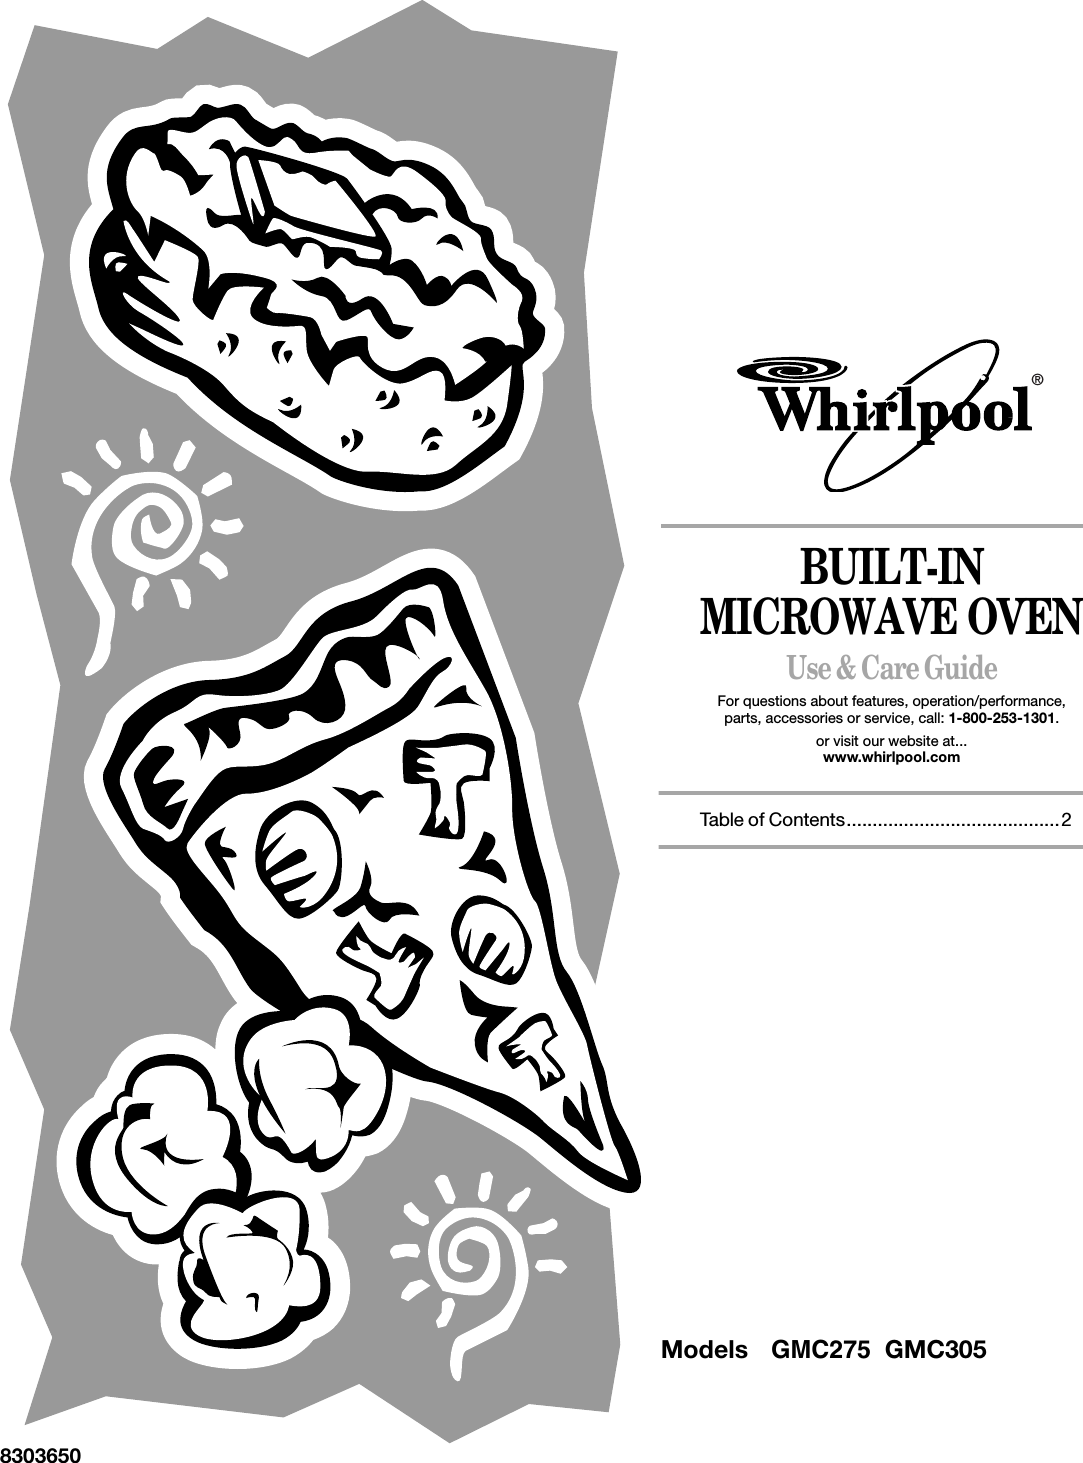 BUILT-INMICROWAVE OVENUse &amp; Care GuideFor questions about features, operation/performance,parts, accessories or service, call: 1-800-253-1301.or visit our website at...www.whirlpool.com     Table of Contents.........................................28303650®Models GMC275 GMC305